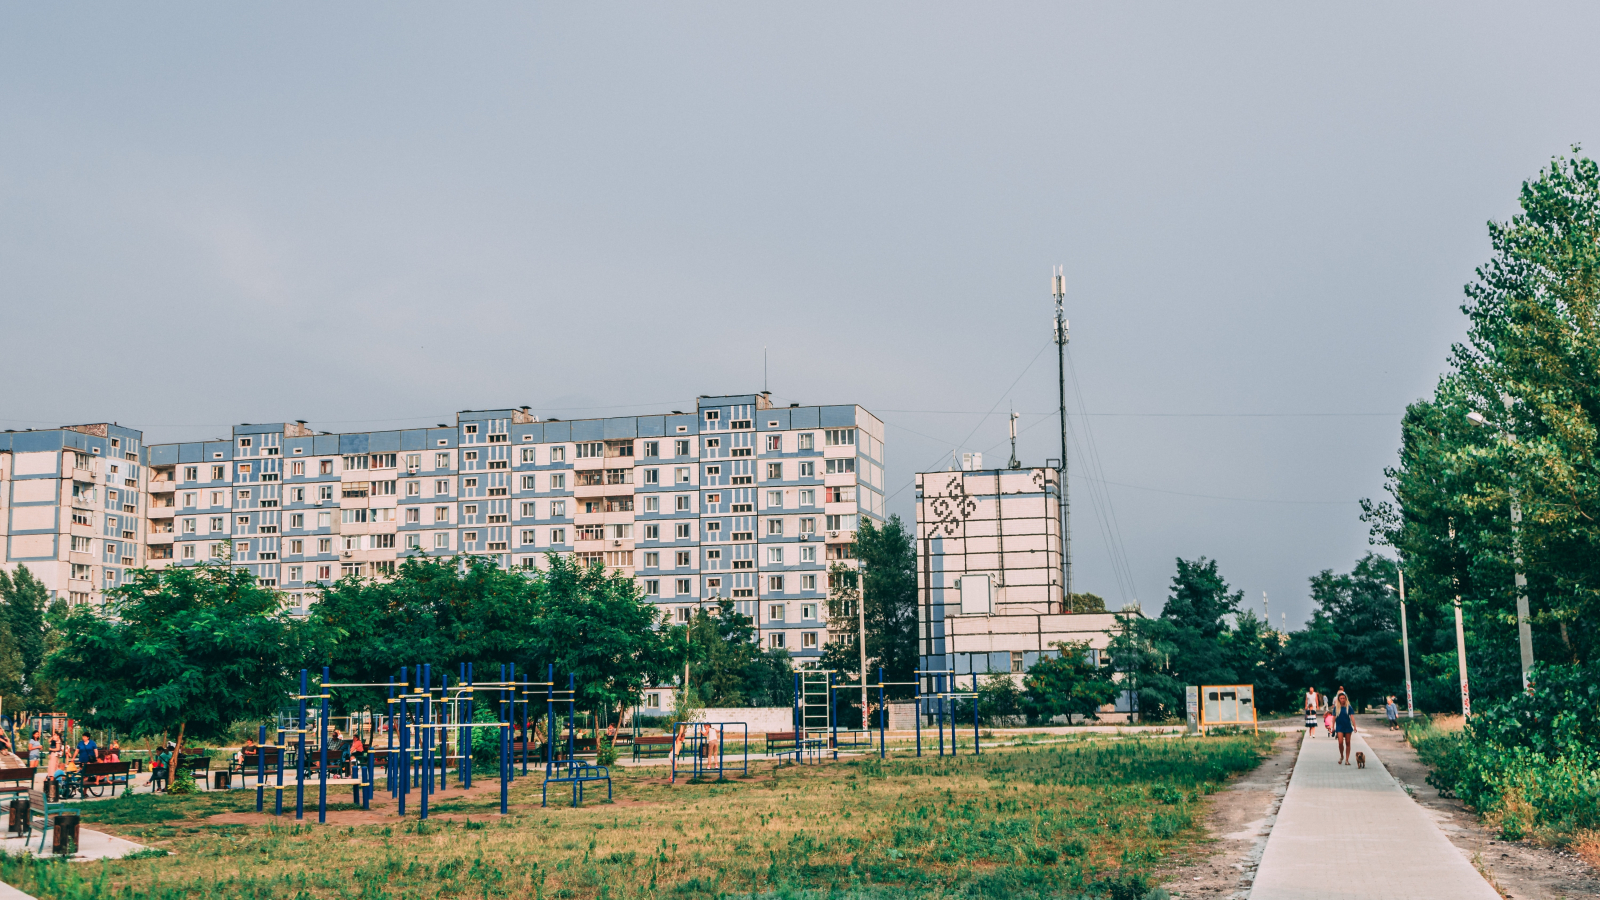 Ukraine: EU and Energy Efficiency Fund will help city of Pokrovsk become more energy efficient 